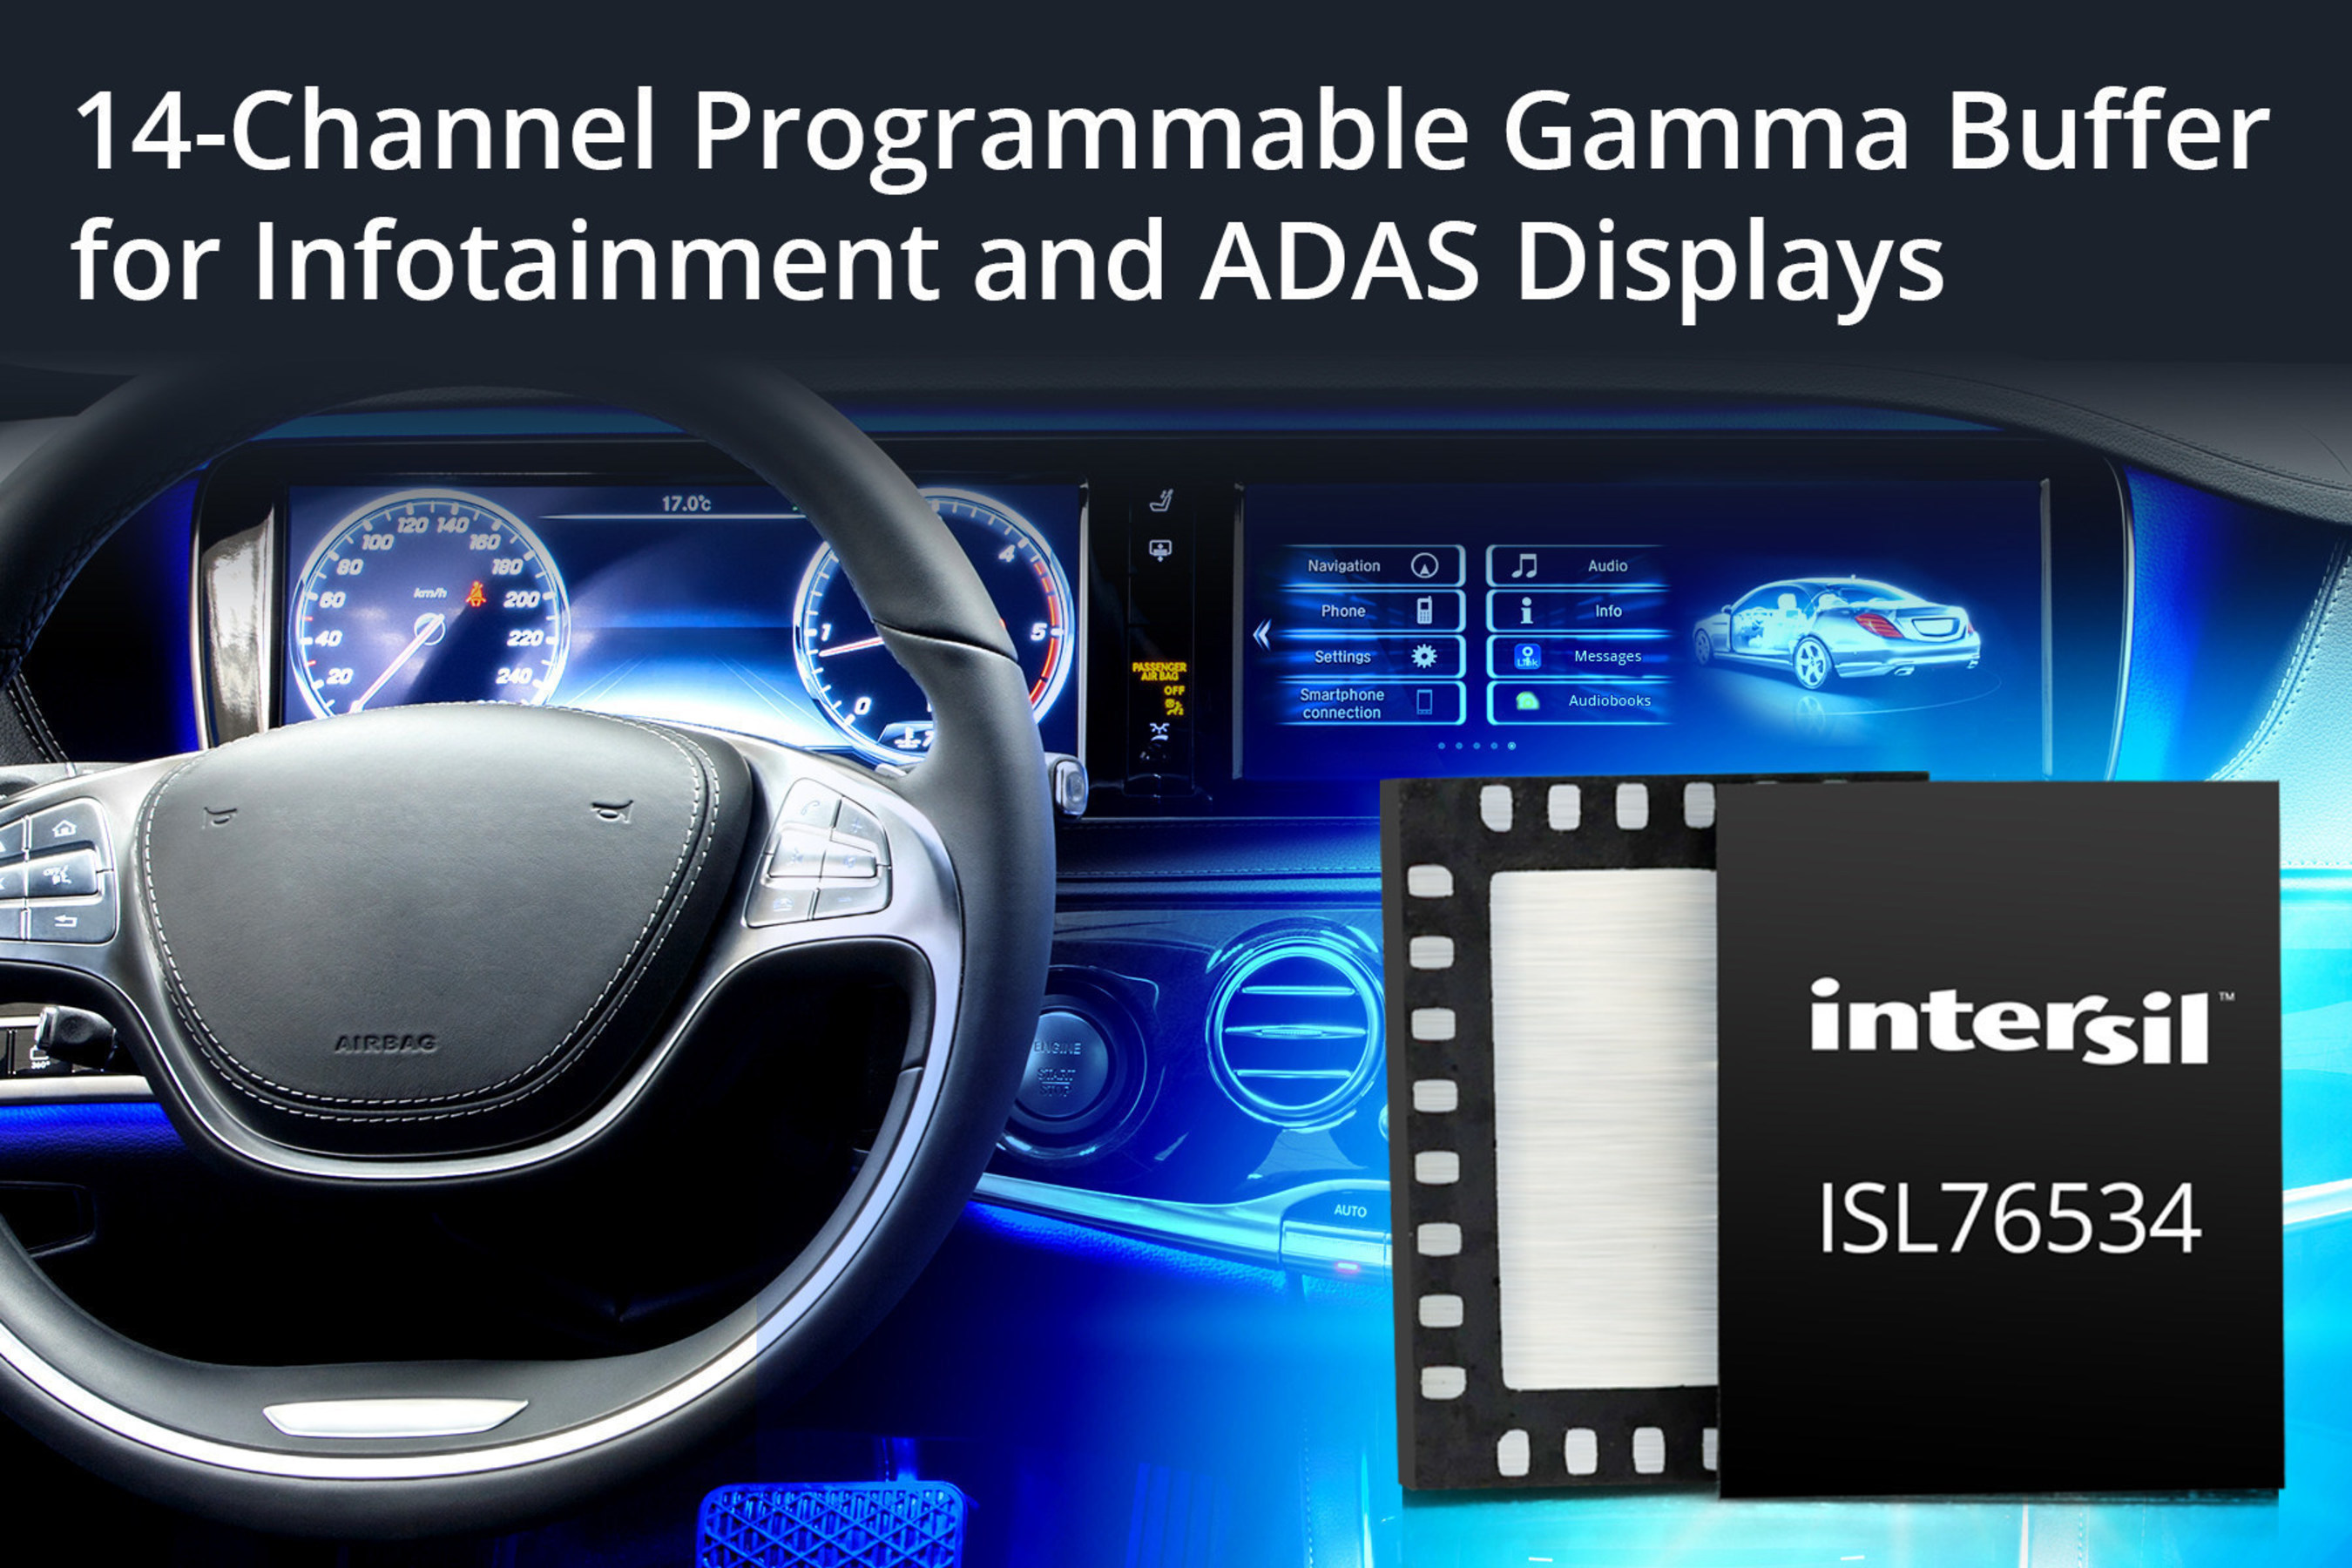 Intersil's automotive-grade ISL76534 delivers lowest power and highest accuracy gamma calibration to enable bright, high-contrast LCD displays.